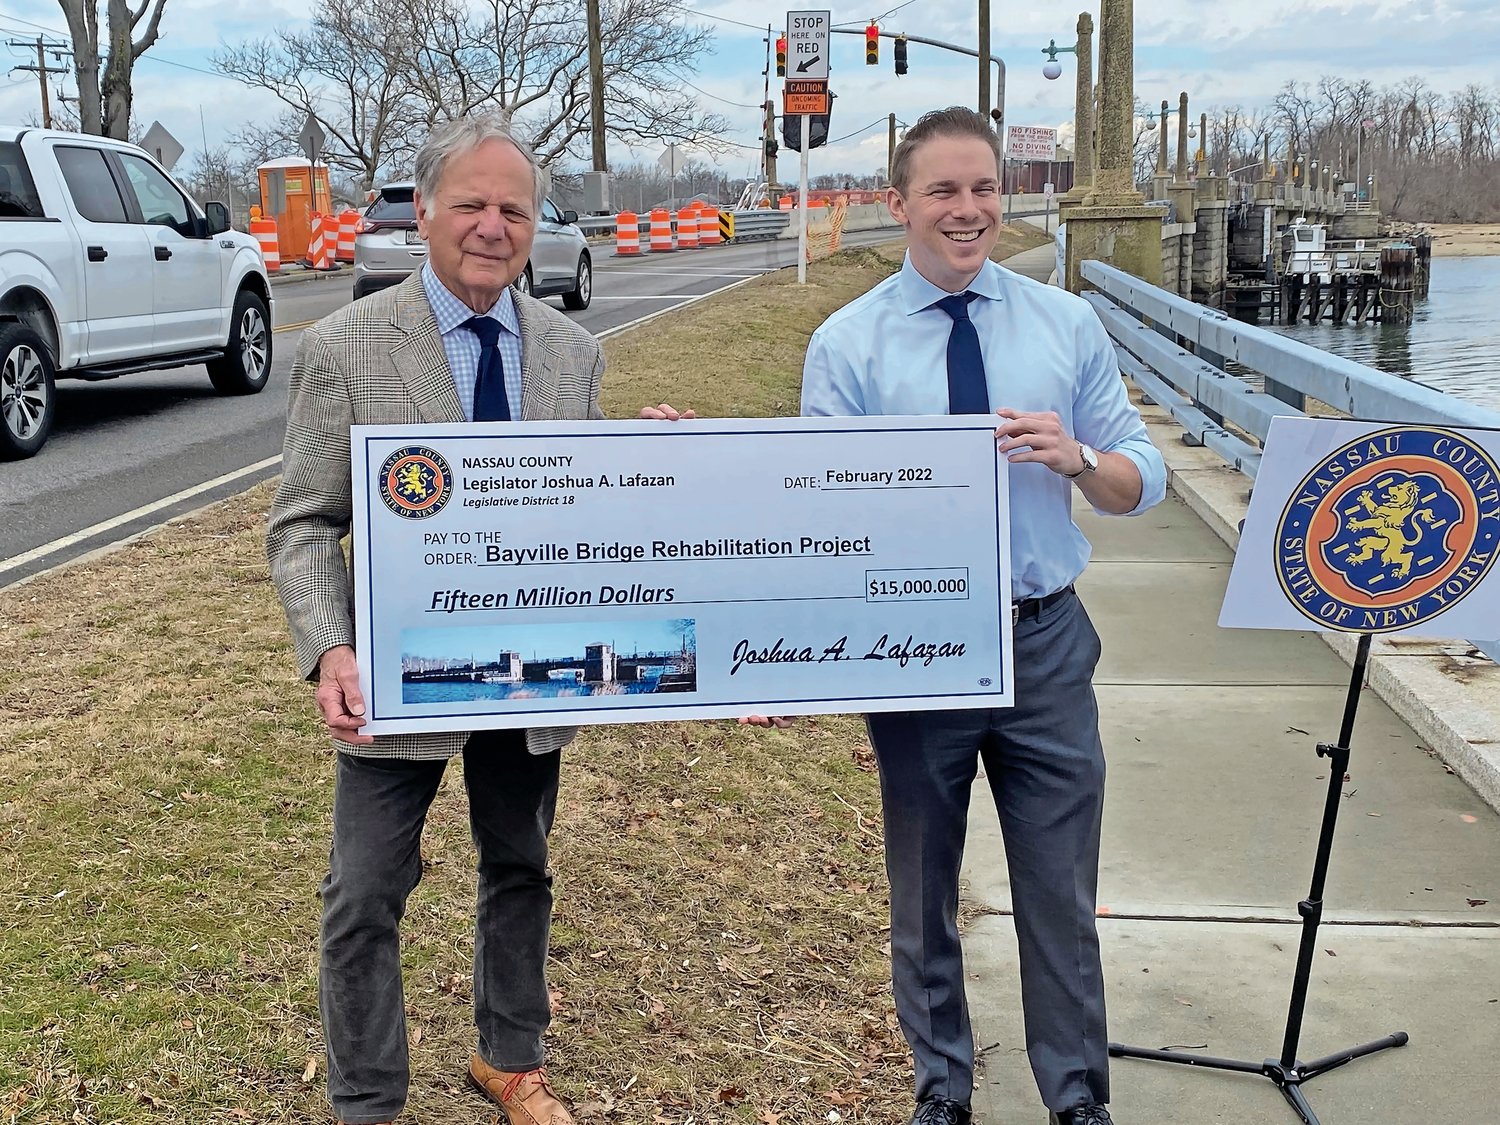 Nassau County Legislator Josh Lafazan, right, held a news conference on Wednesday to offer $15 million in county funding to help complete the multi-year Bayville Bridge Rehabilitation Project. Bayville Mayor Bob De Natale joined him.